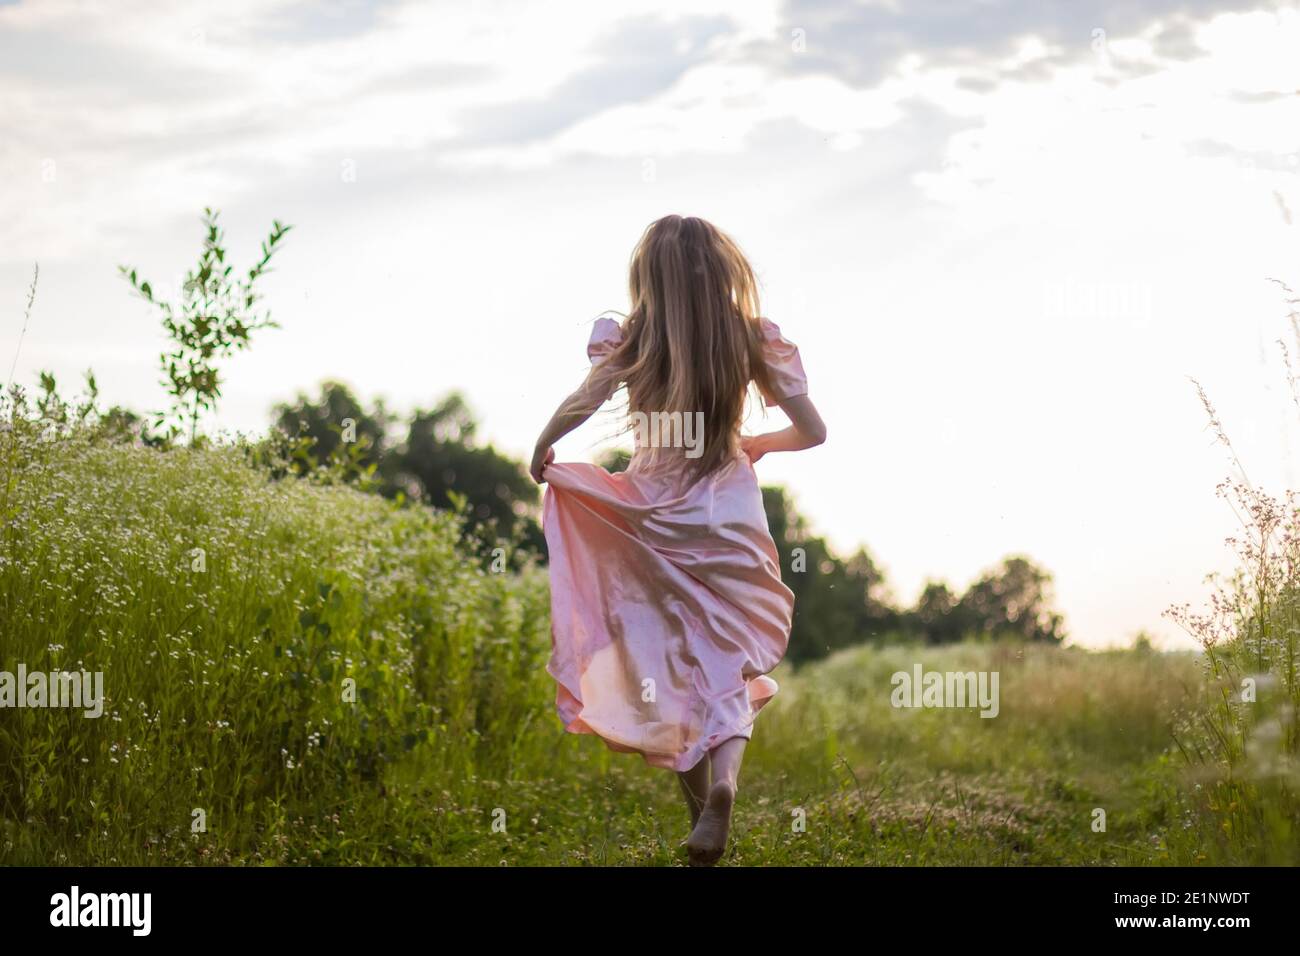 girl running across the field in a pink dress Stock Photo